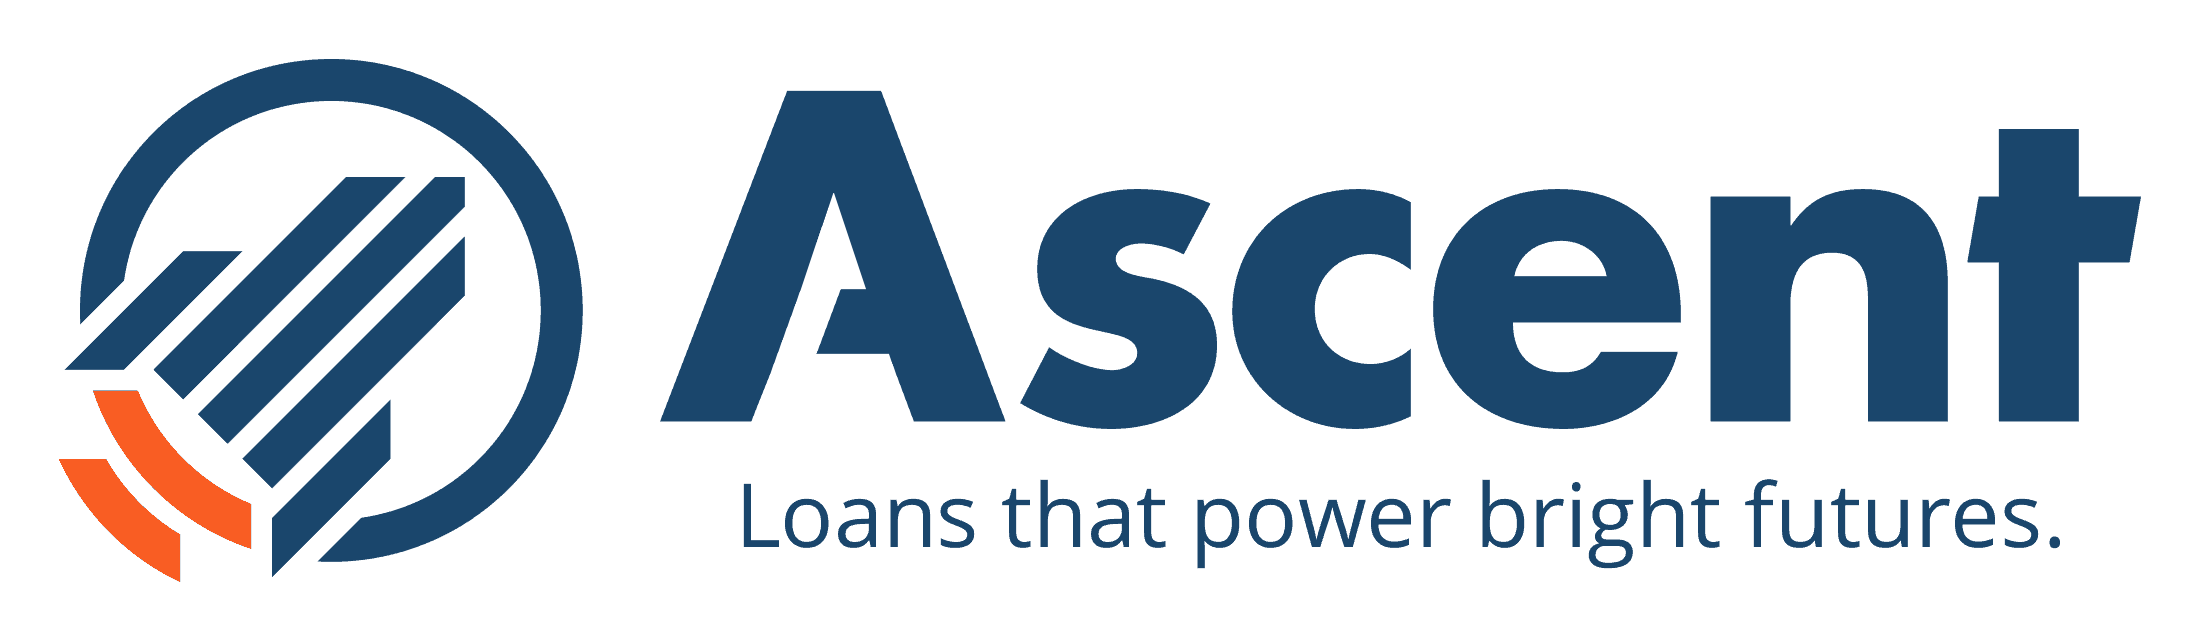 INvestEd Student Loans Comparison: Ascent Student Loans